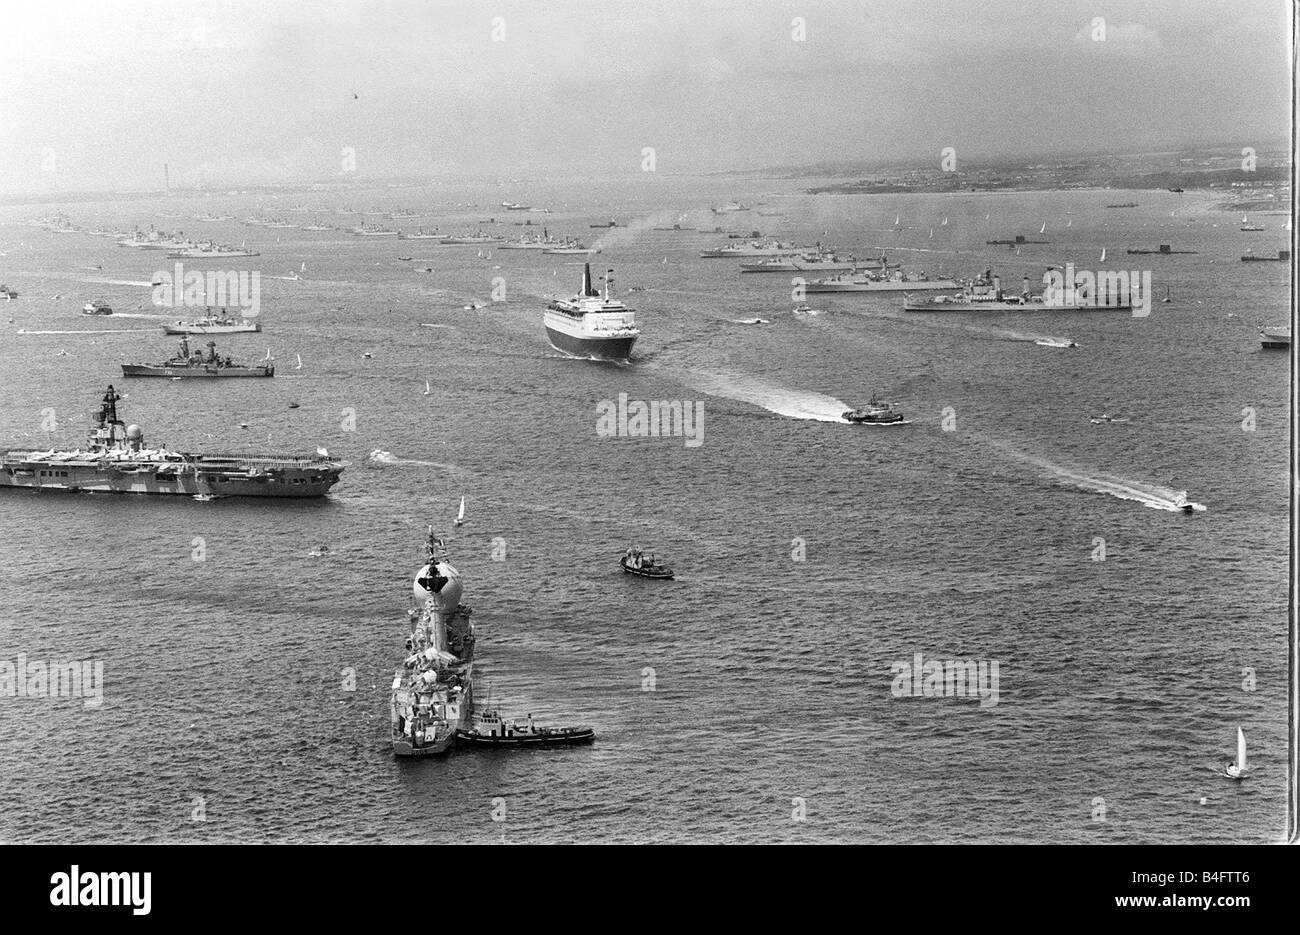 1970s ships Black and White Stock Photos & Images - Alamy